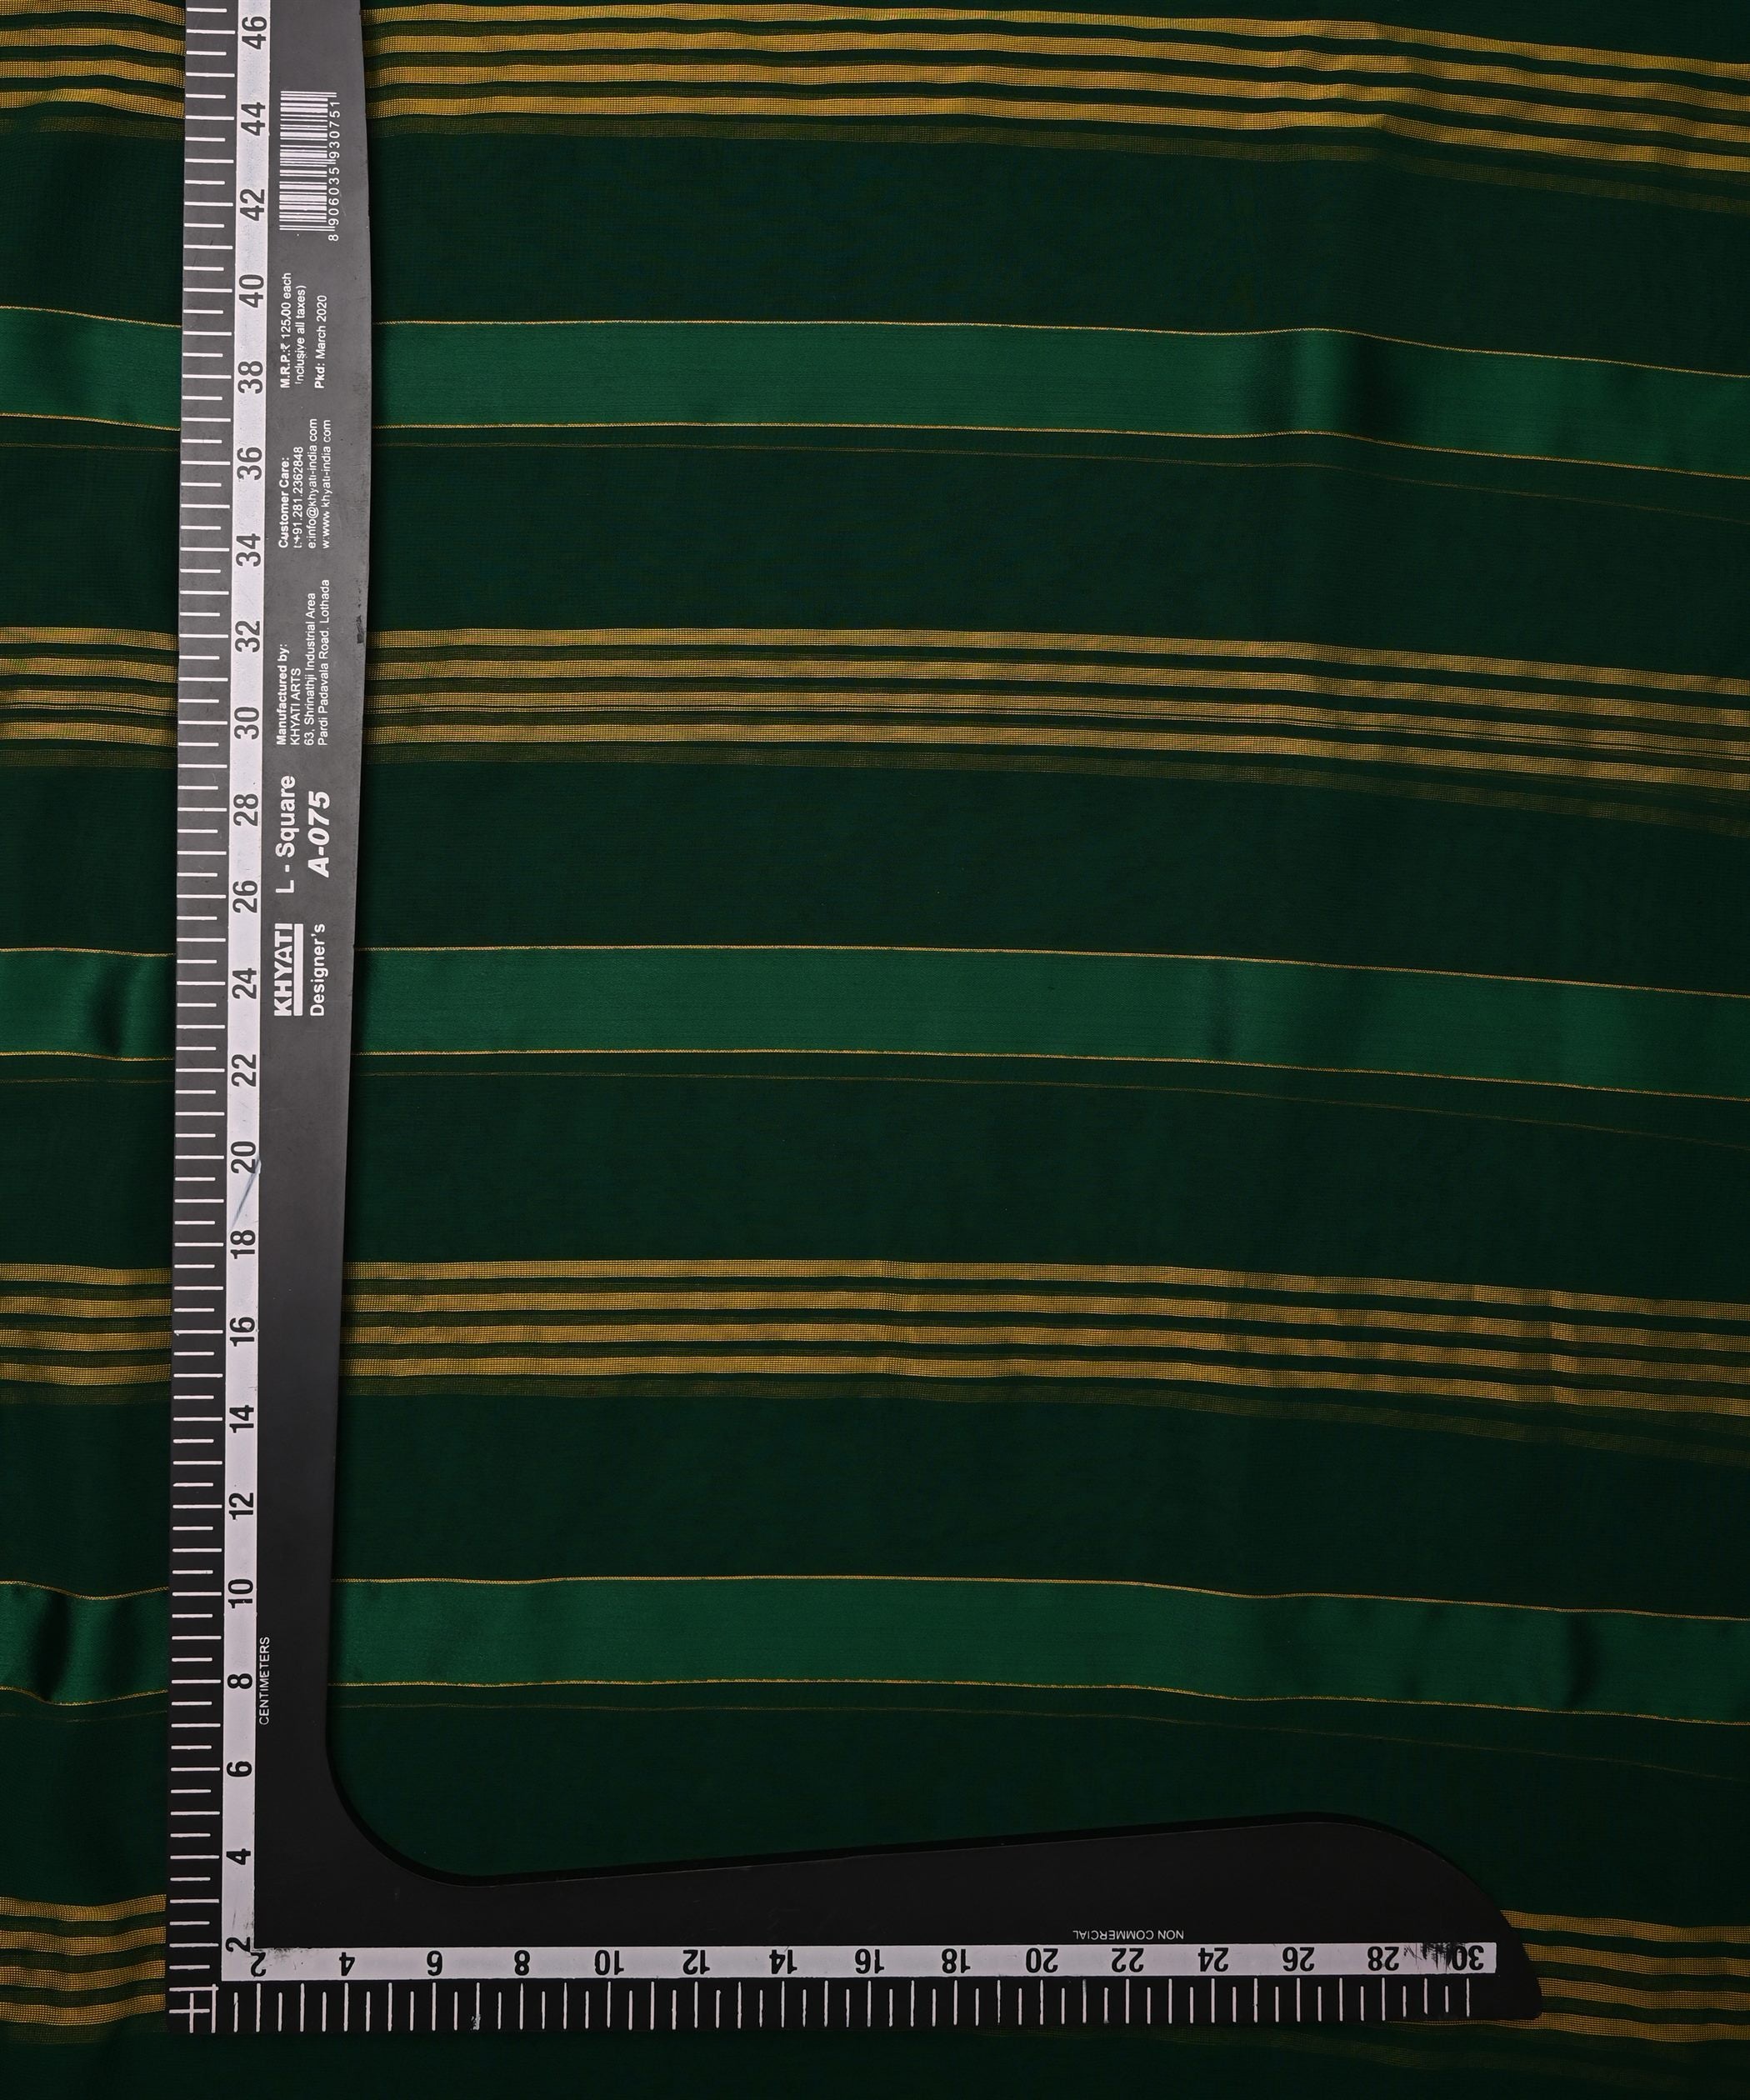 Dark Green Georgette Fabric with Gold and Satin Stripes